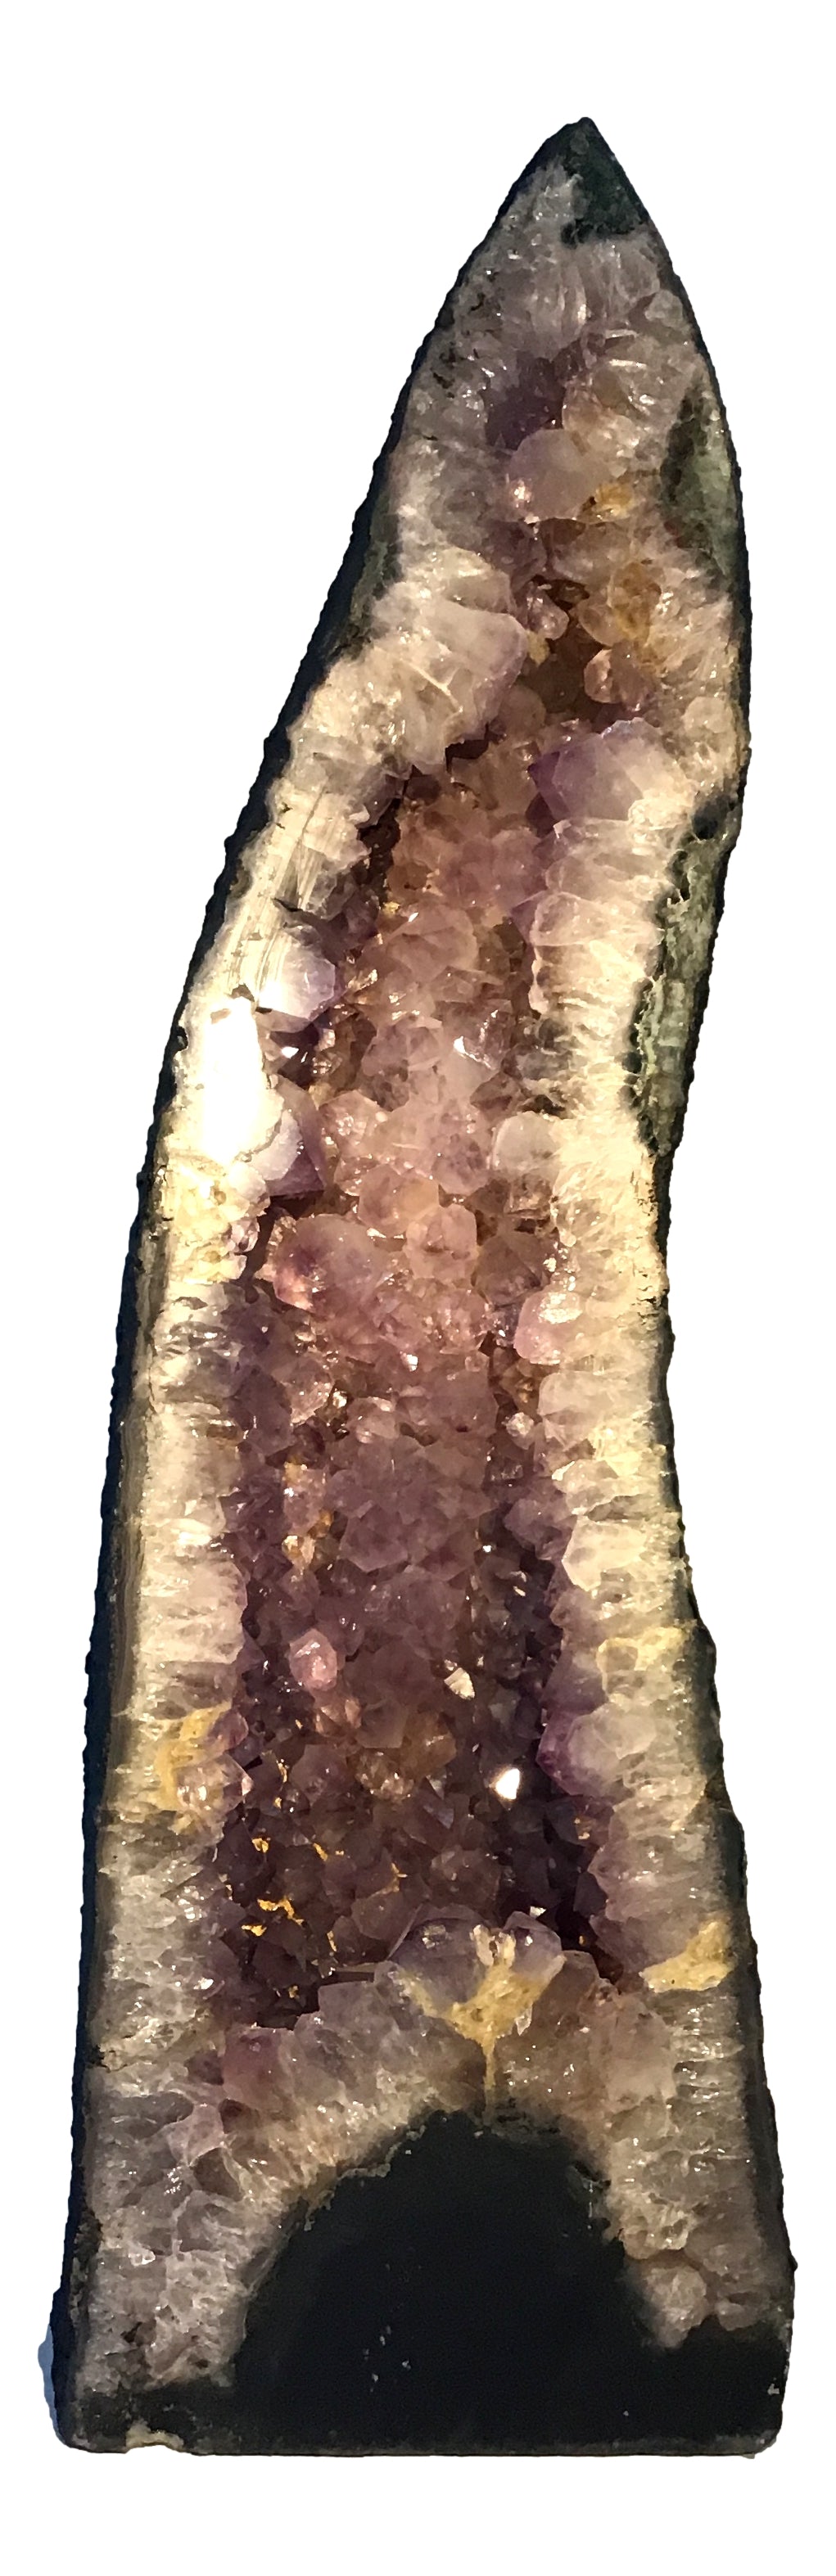 Stunning 24 Inch Tall AMETHYST TOWER - (11) with Citrine